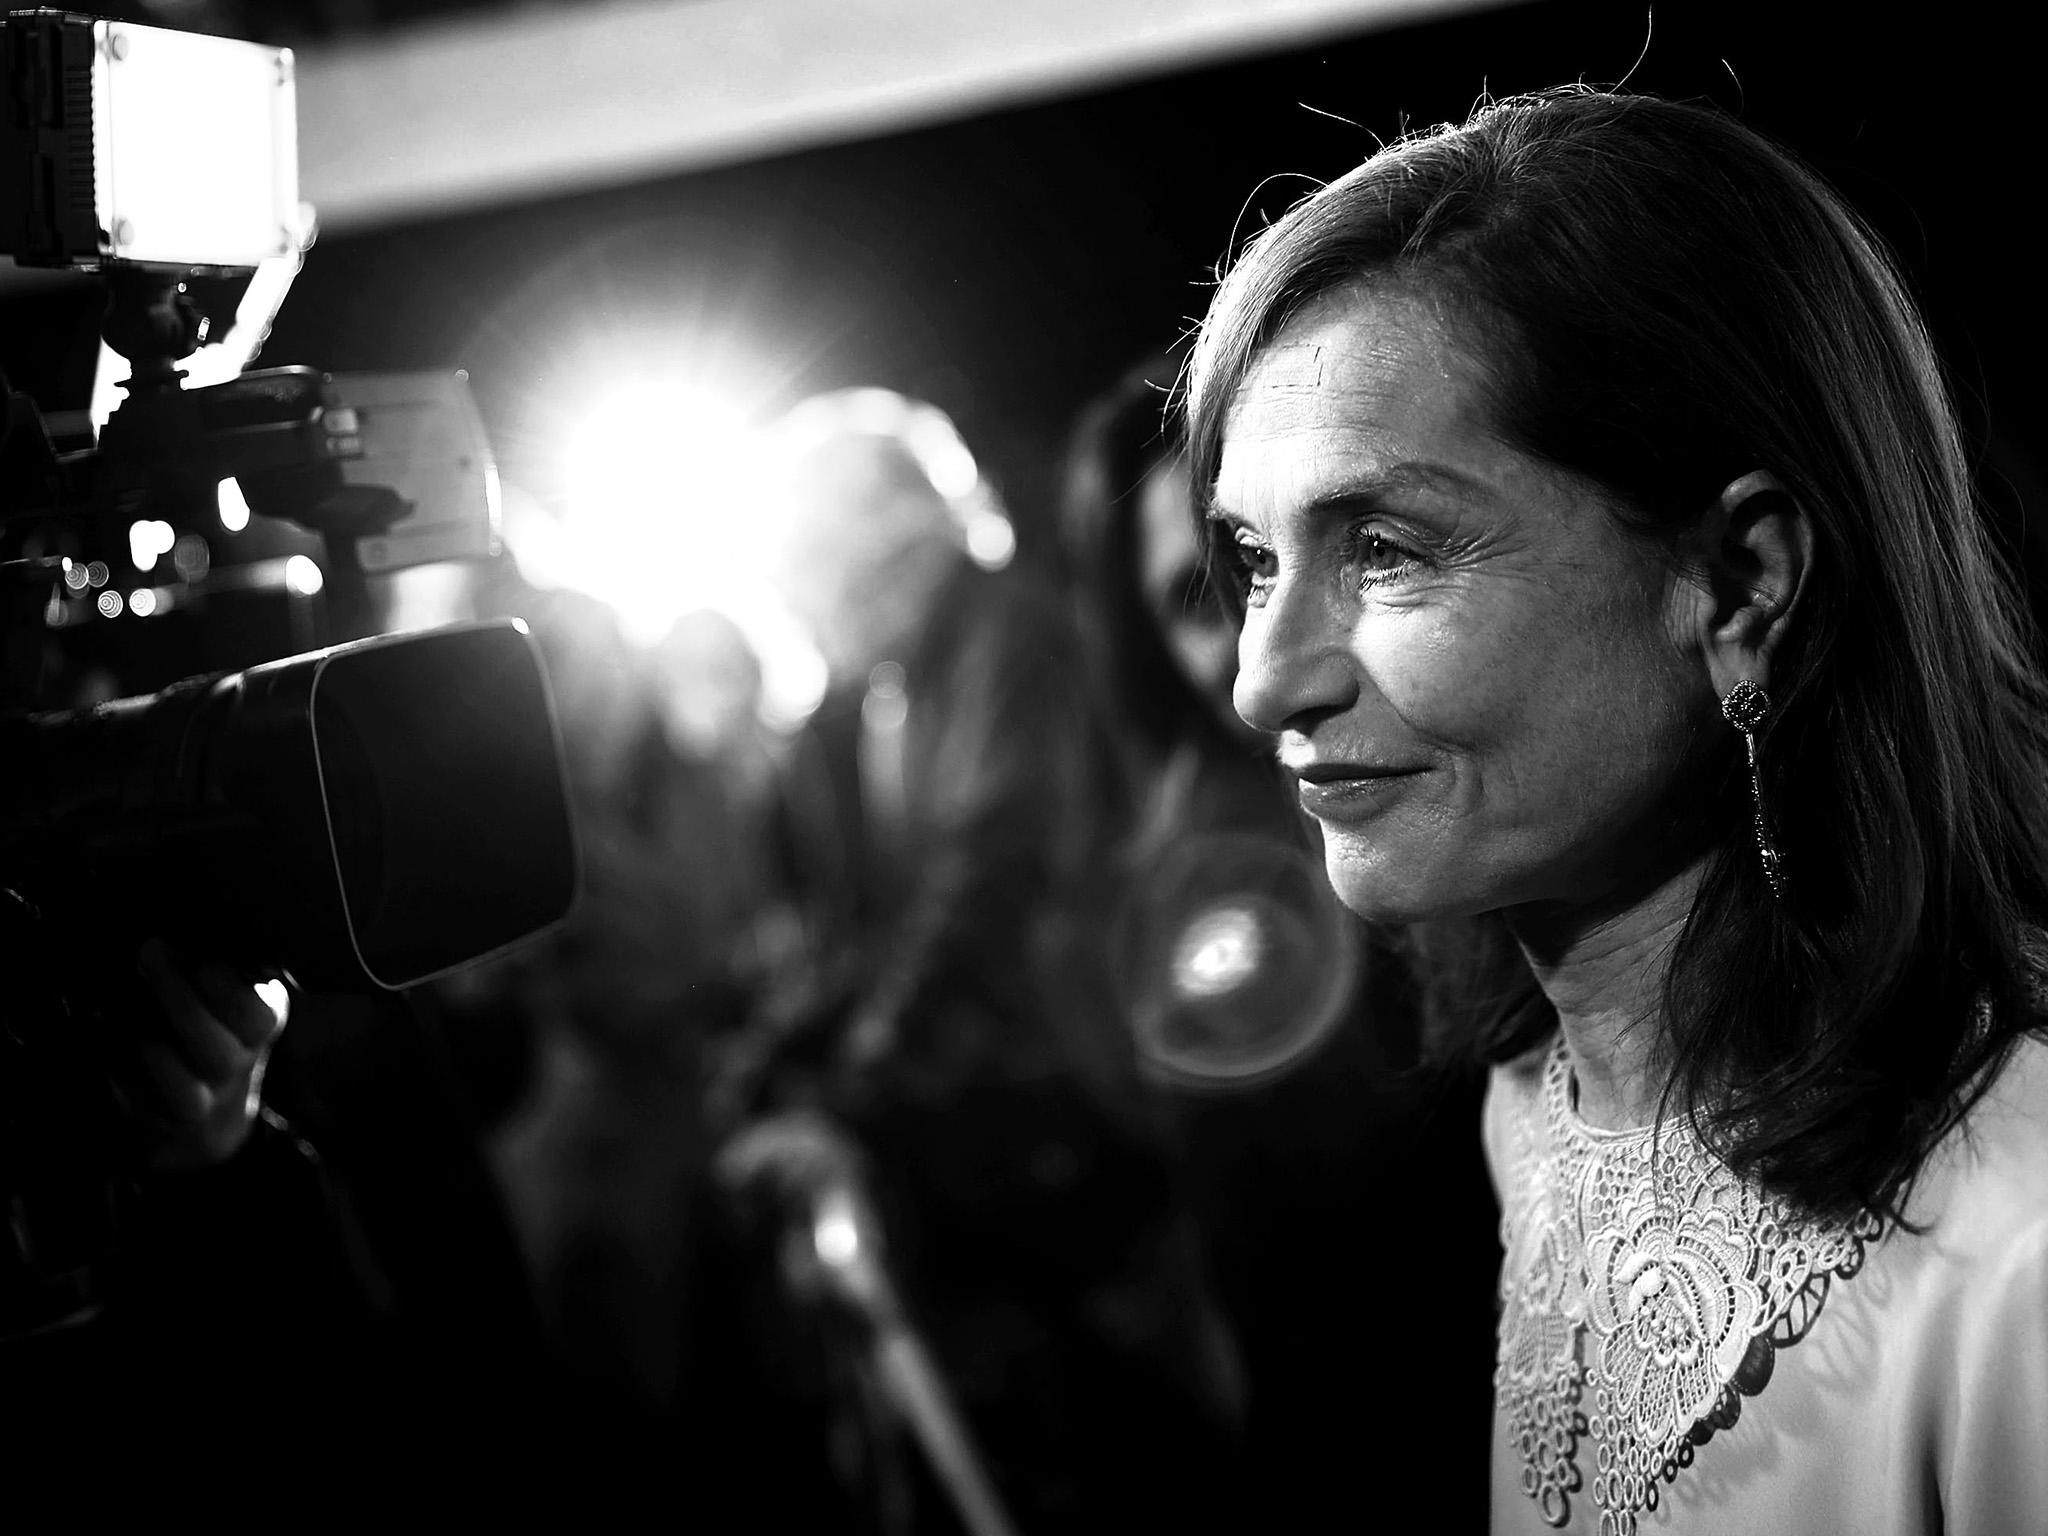 Huppert: ‘In my roles I try to explore as many complexities as possible in feminine behaviour’